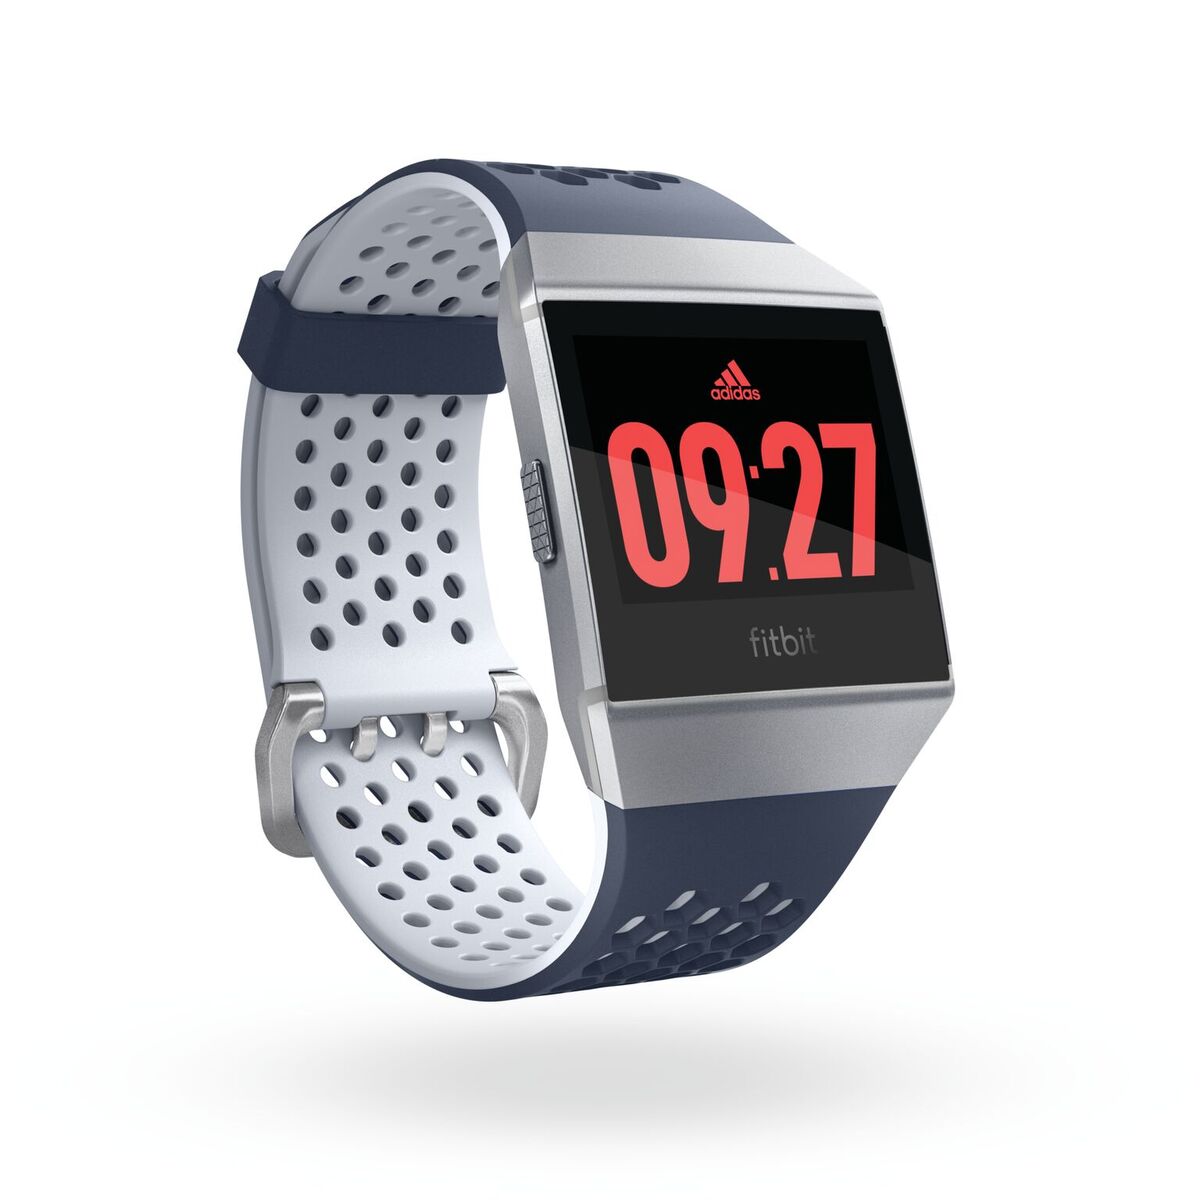 Adidas shifts from its own wearable tech | TechCrunch